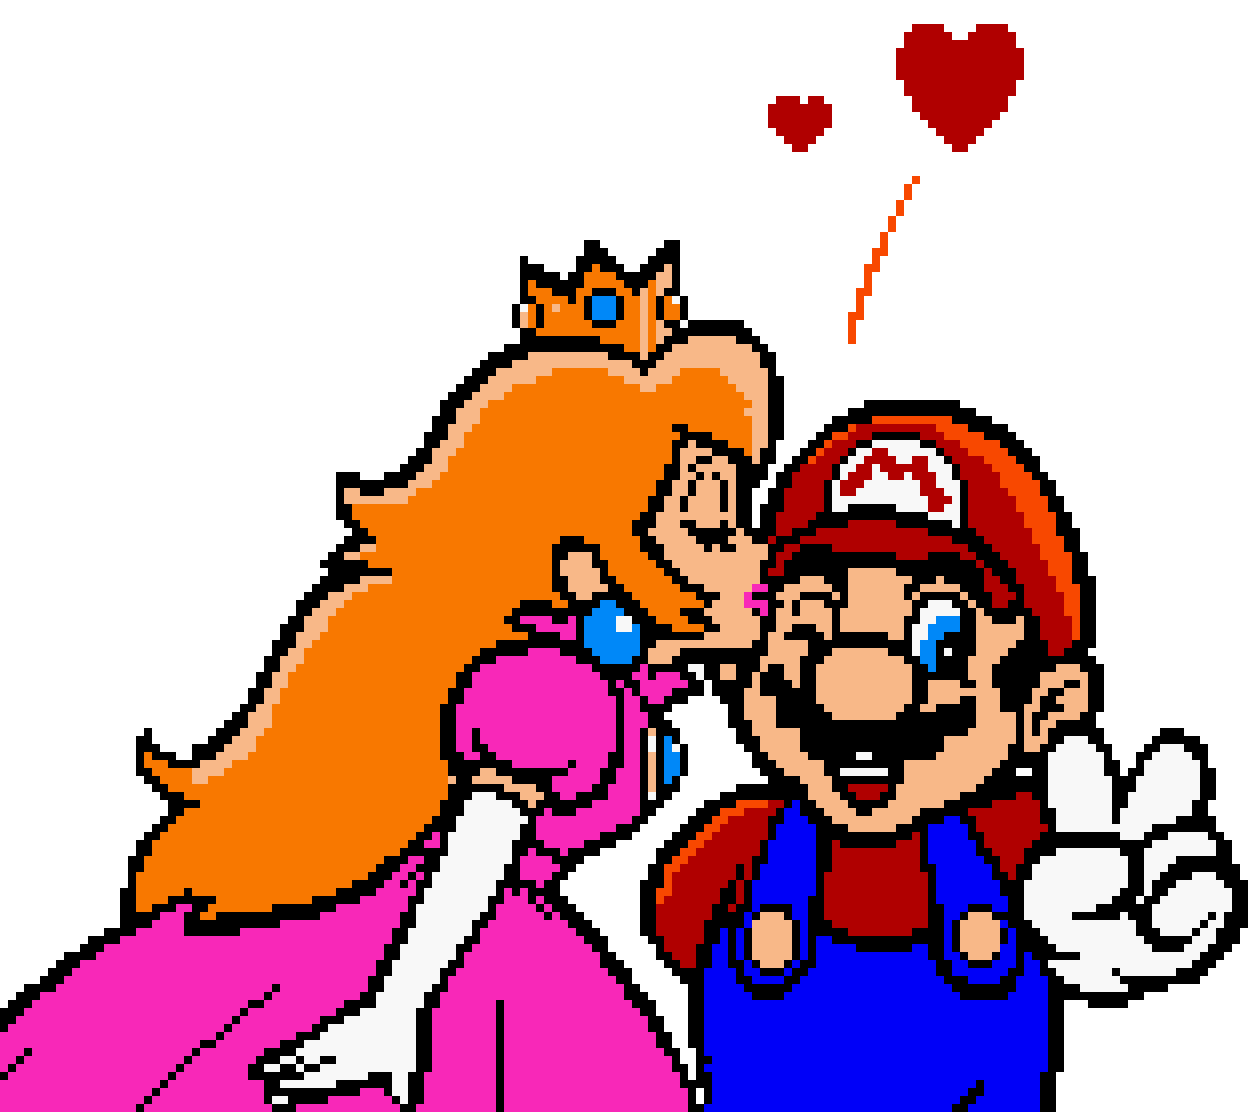 lago Titicaca Ópera Ascensor Your Daily Mario no Twitter: "Mario receiving a kiss from his Princess. C/-  Super Mario Bros. Deluxe https://t.co/2EUtjTY4x6" / Twitter